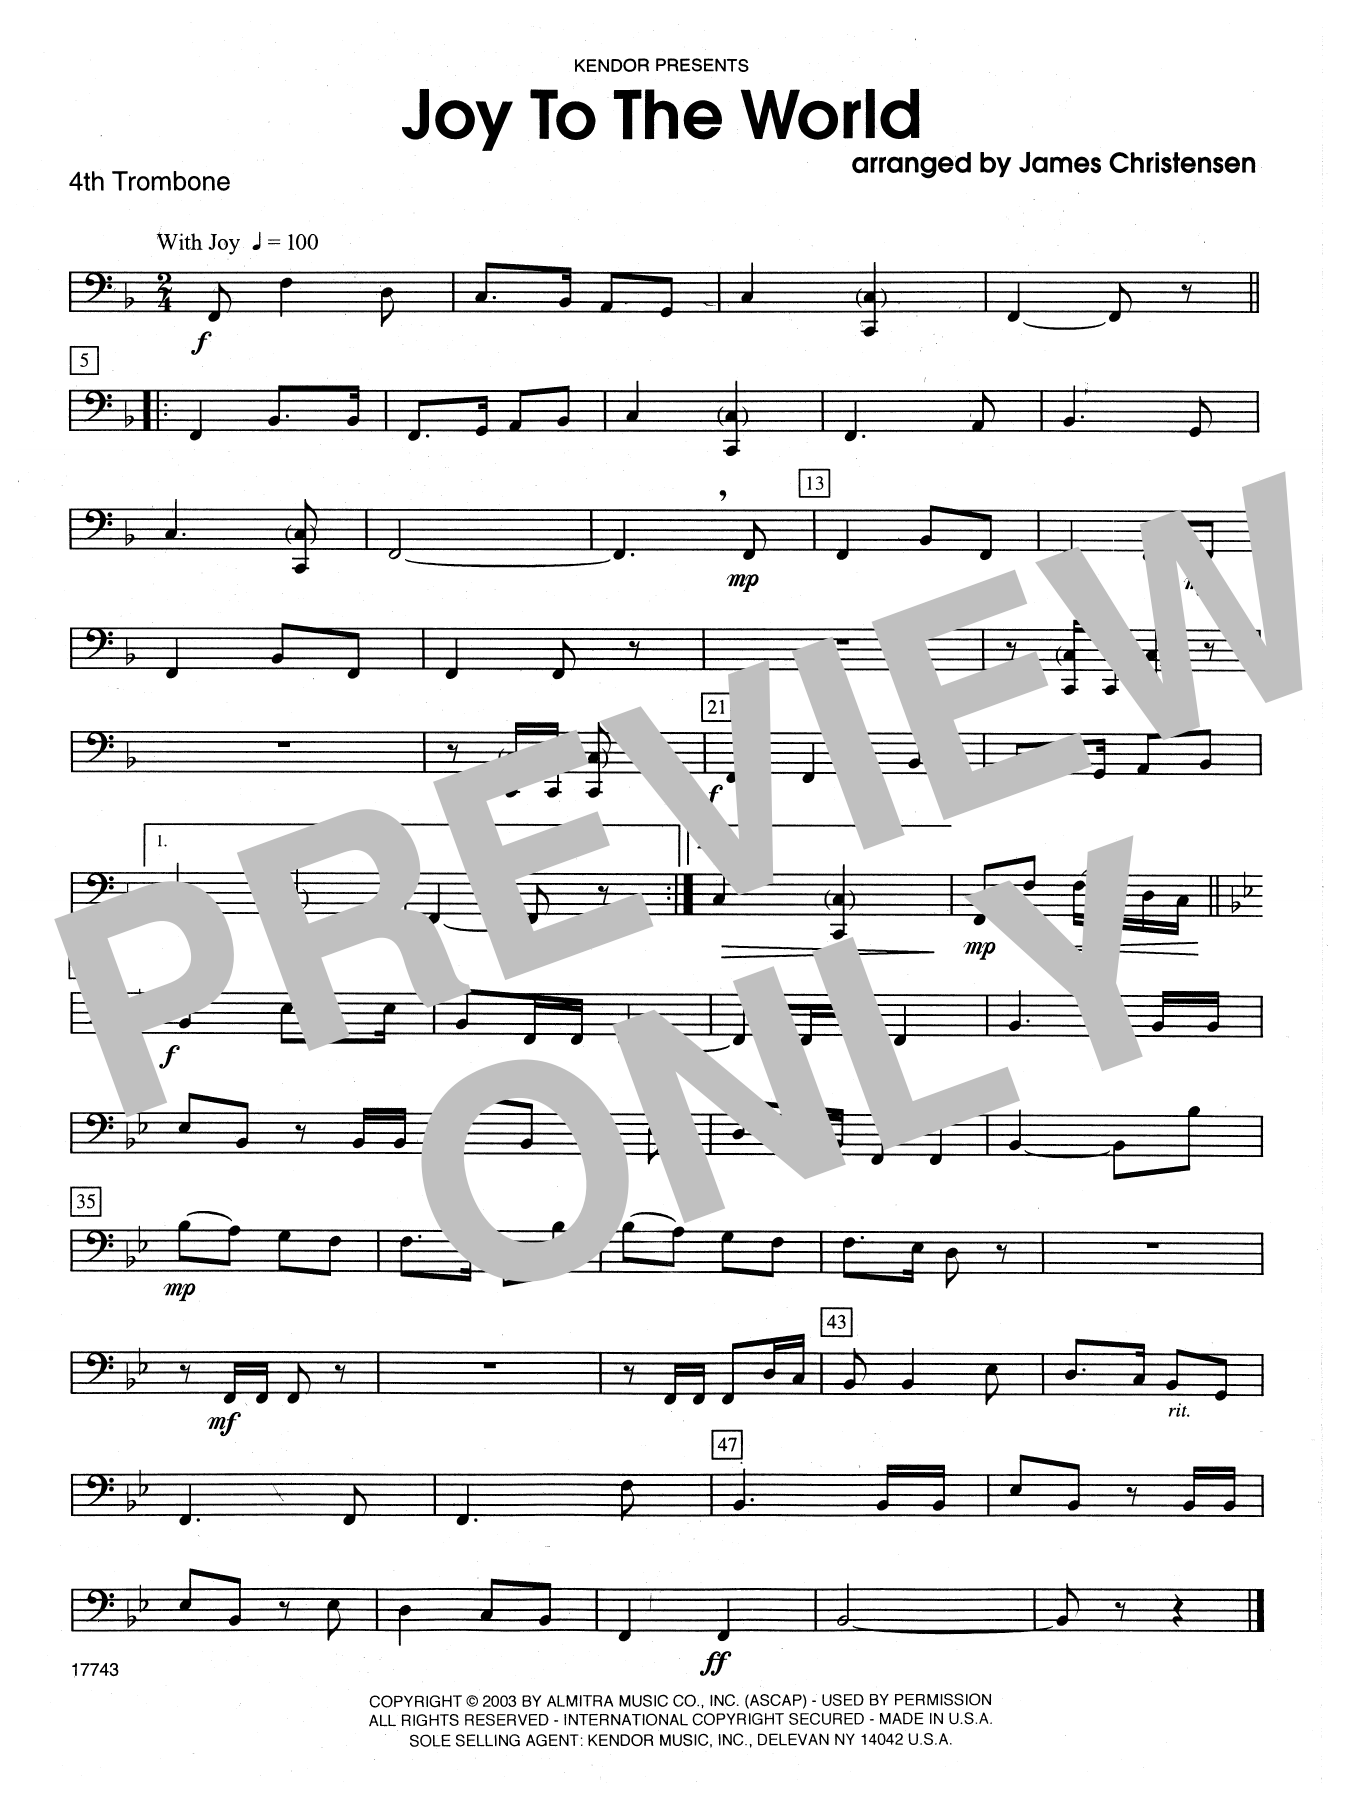 James Christensen Joy to the World - 4th Trombone sheet music notes and chords. Download Printable PDF.